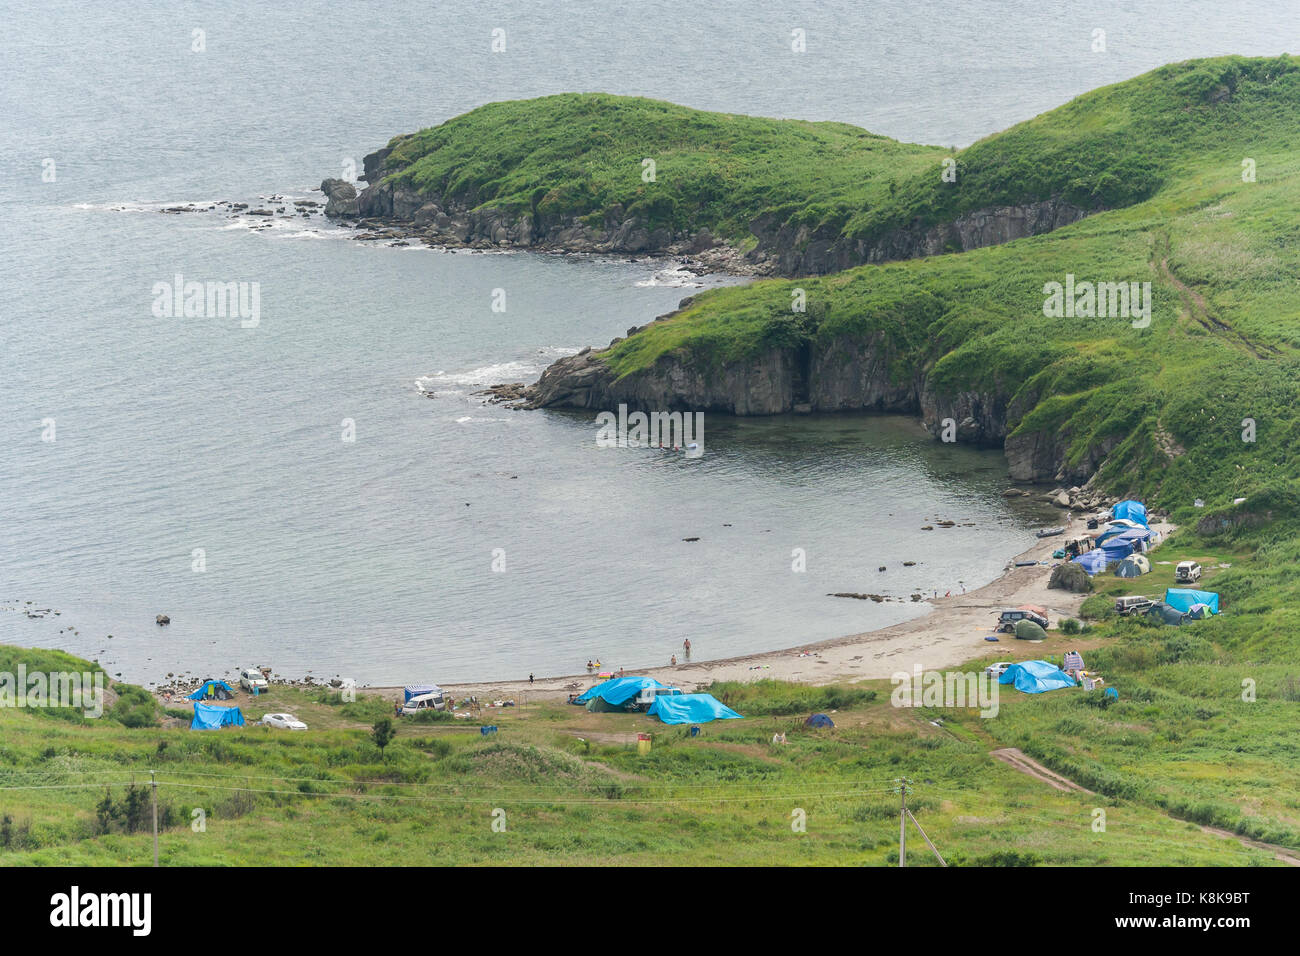 Camping at camp sites on the beach near Vladivostok, Russia Stock Photo